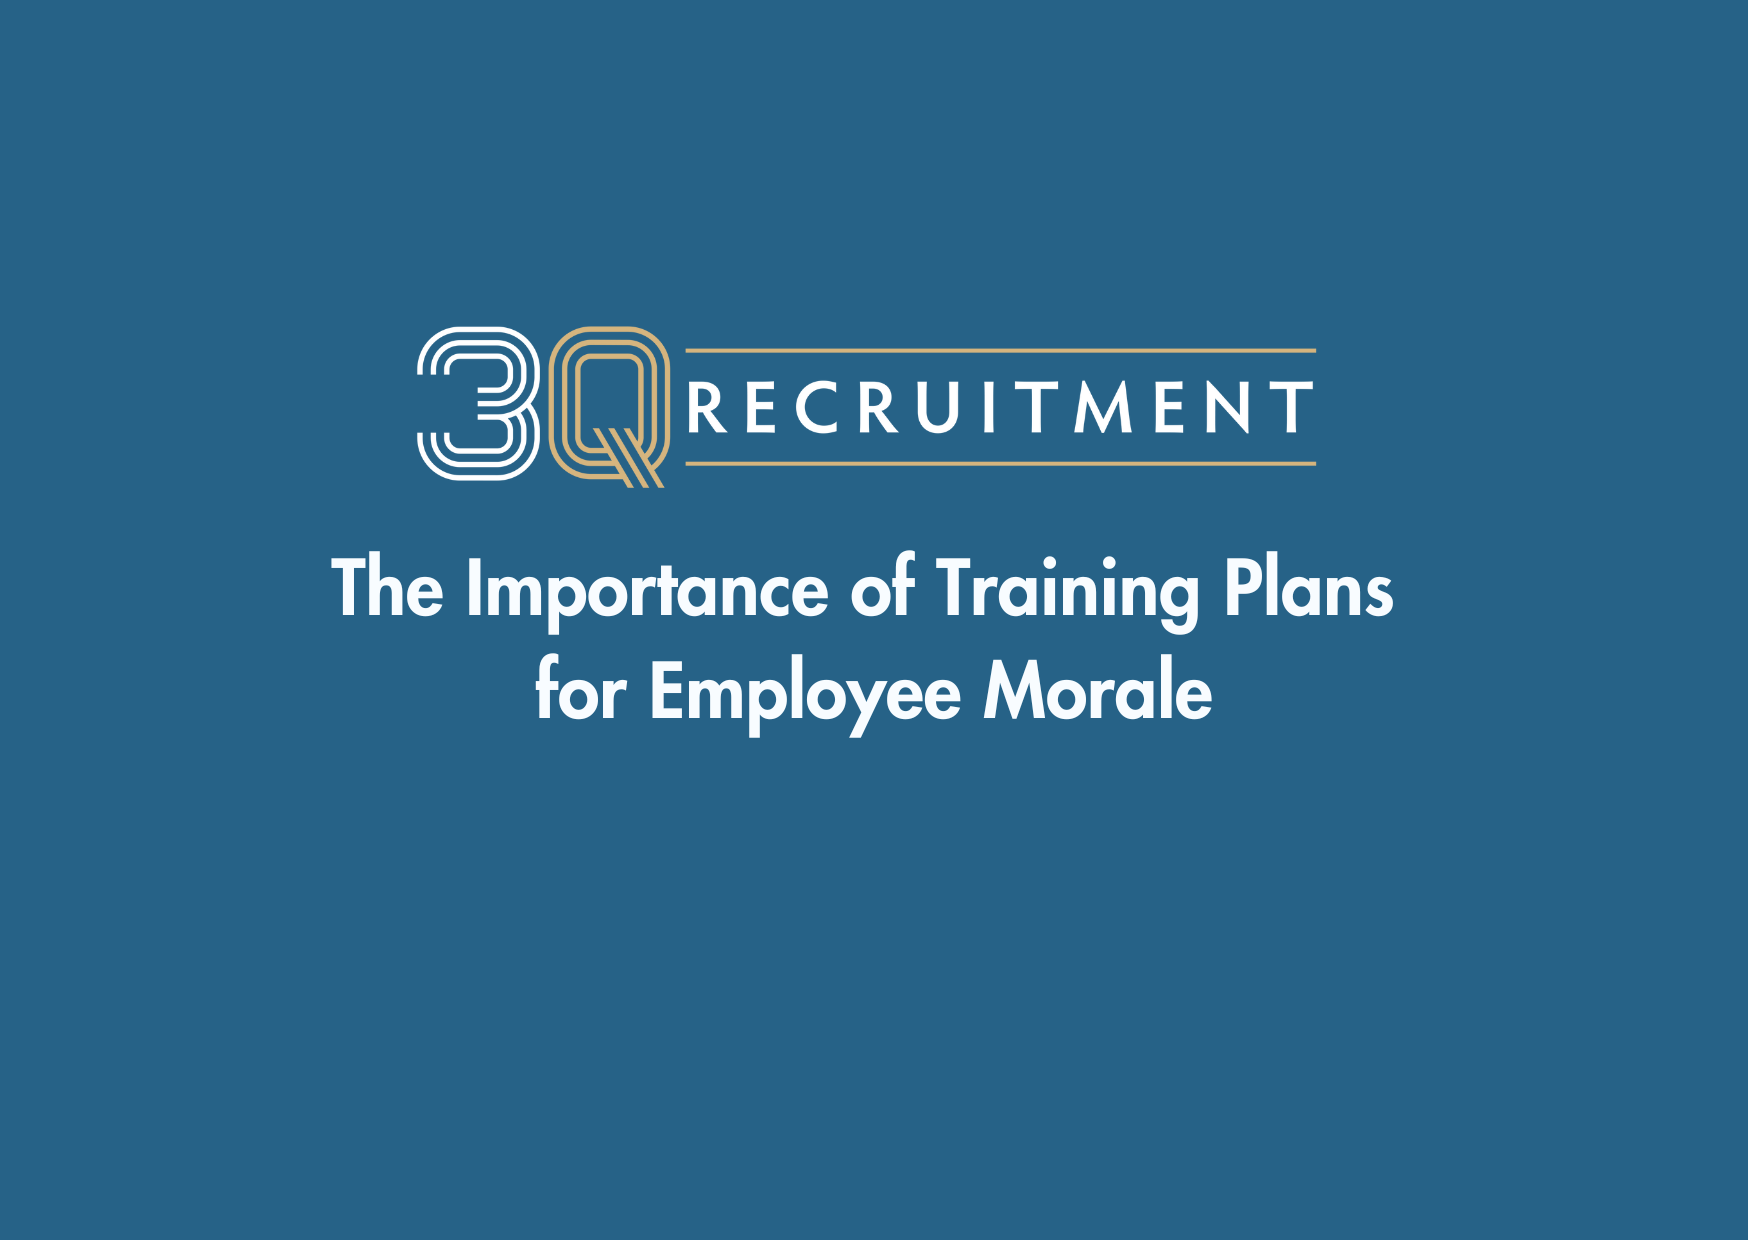 3Q Recruitment The Importance of Training Plans for Employee Morale